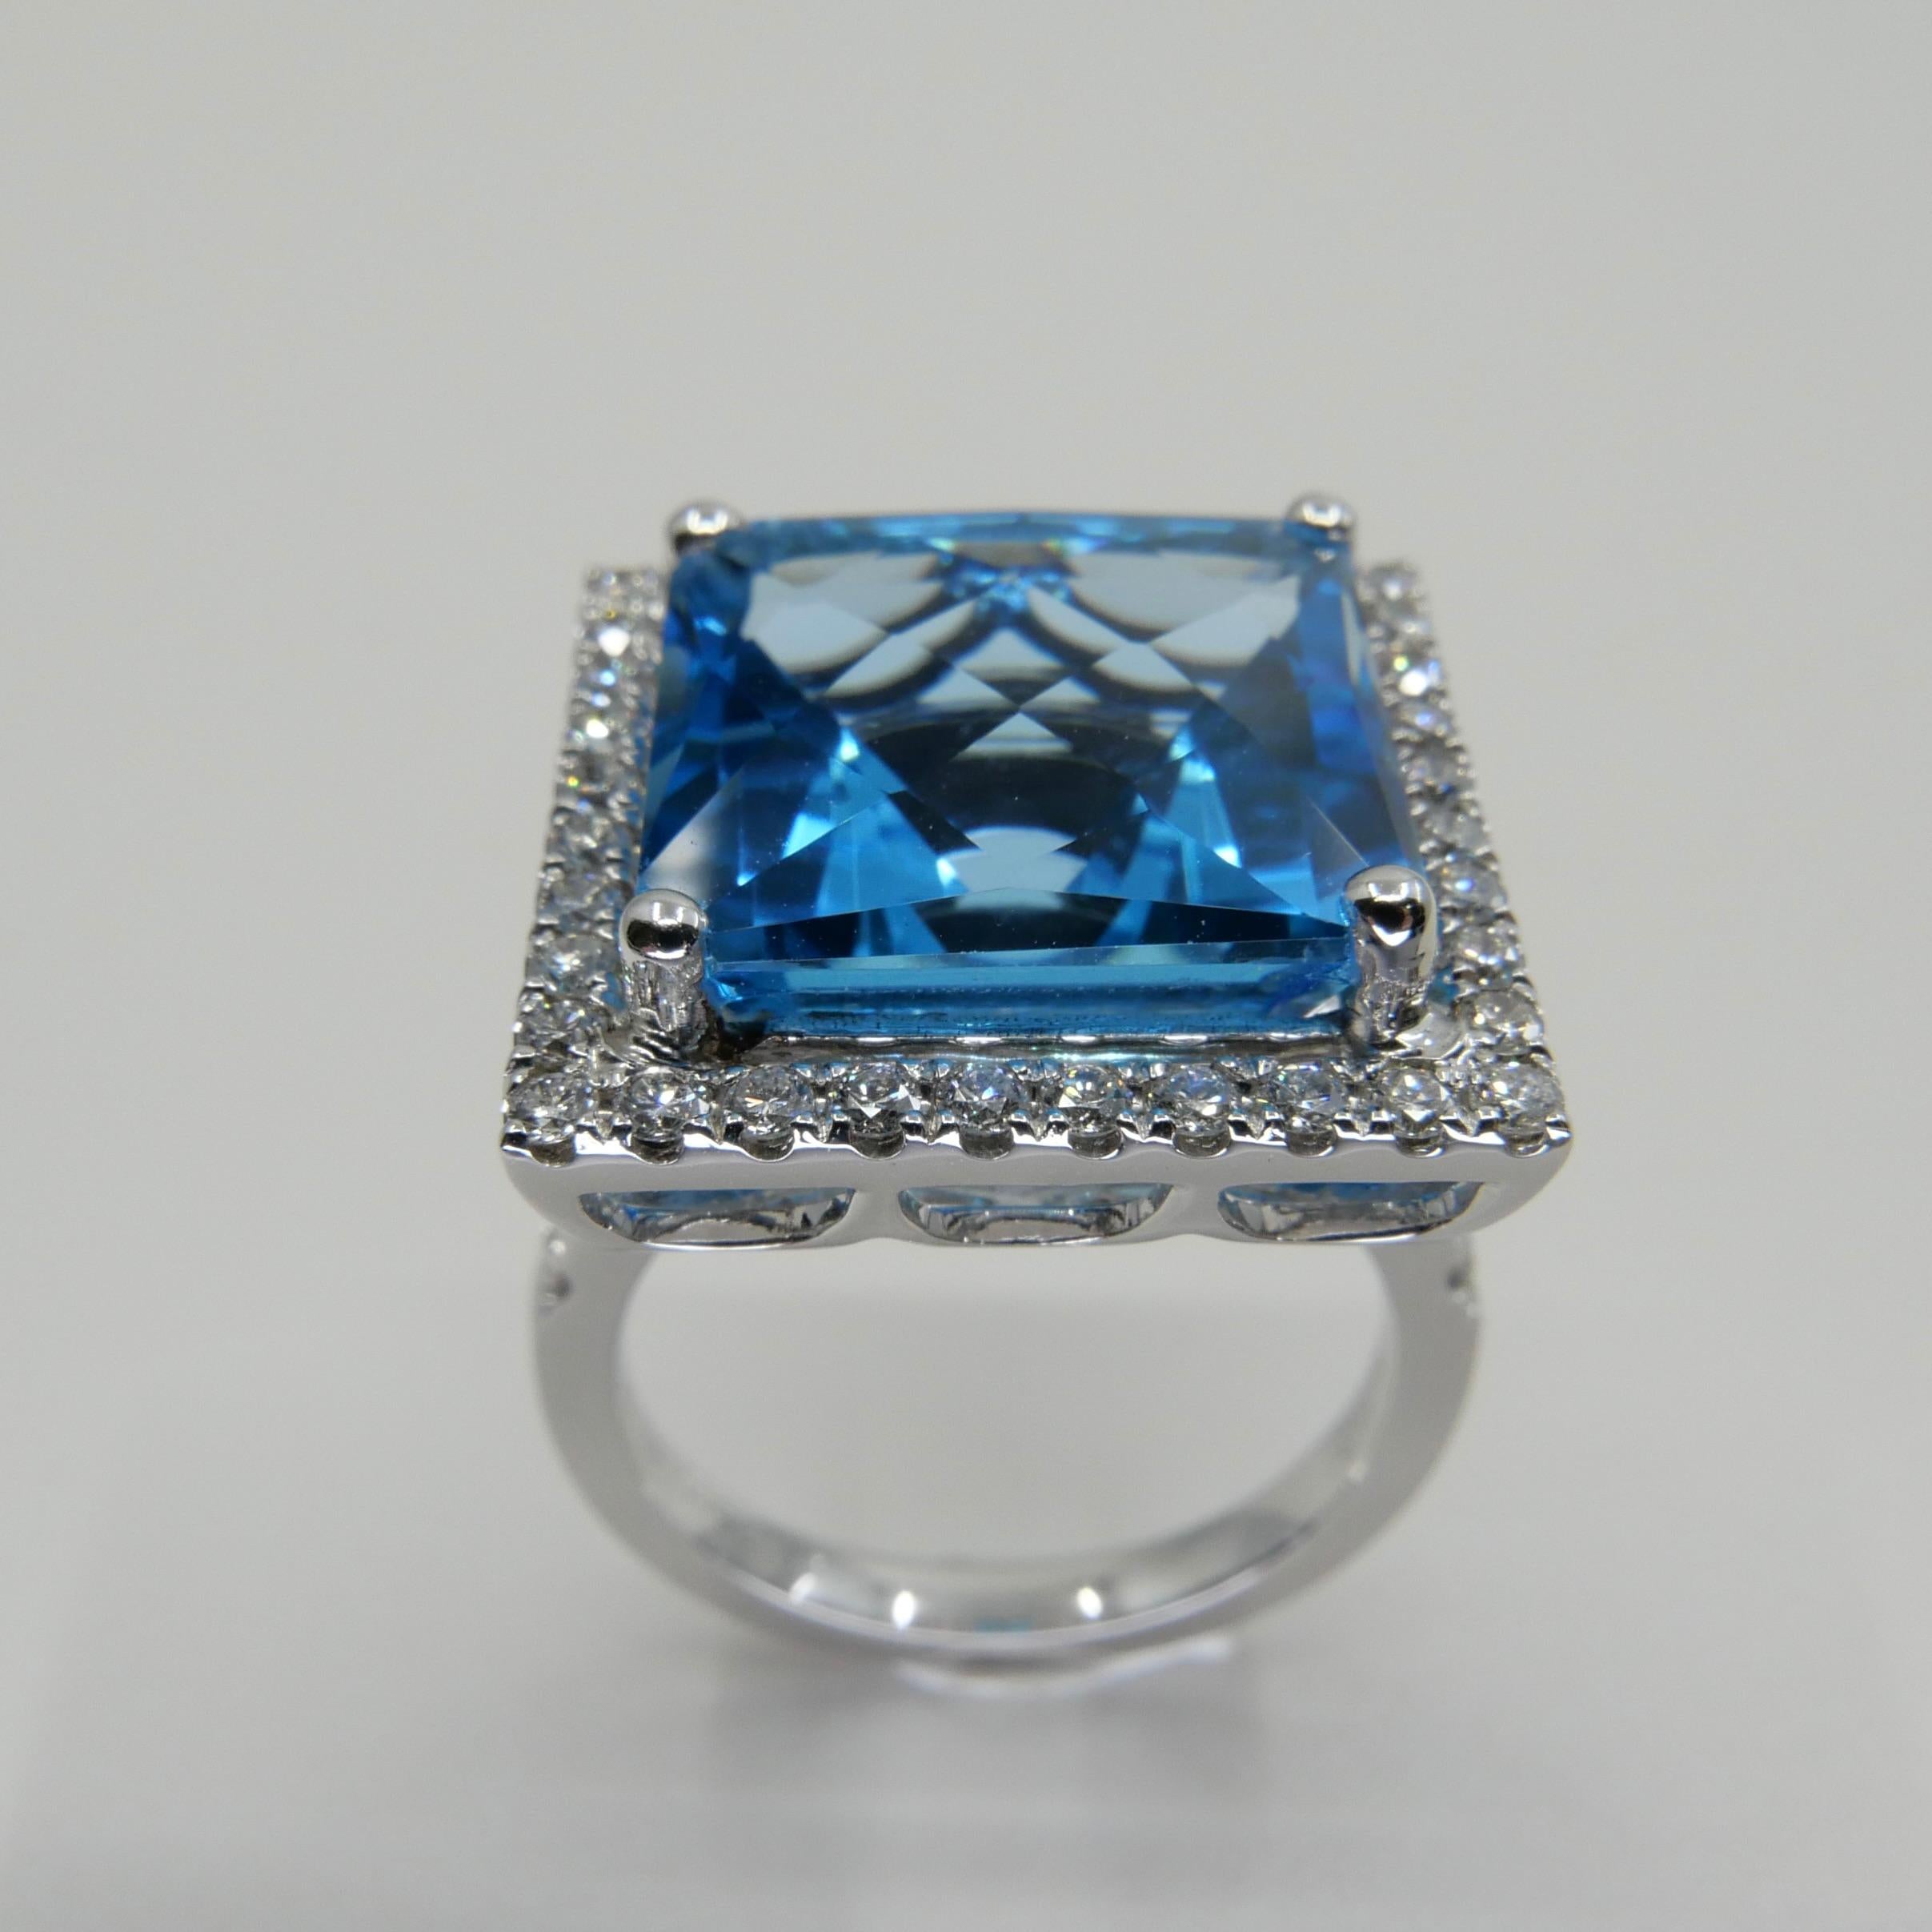  13 Cts checker Square Cut Blue Topaz & Diamond Cocktail Ring. Big Statement. For Sale 2